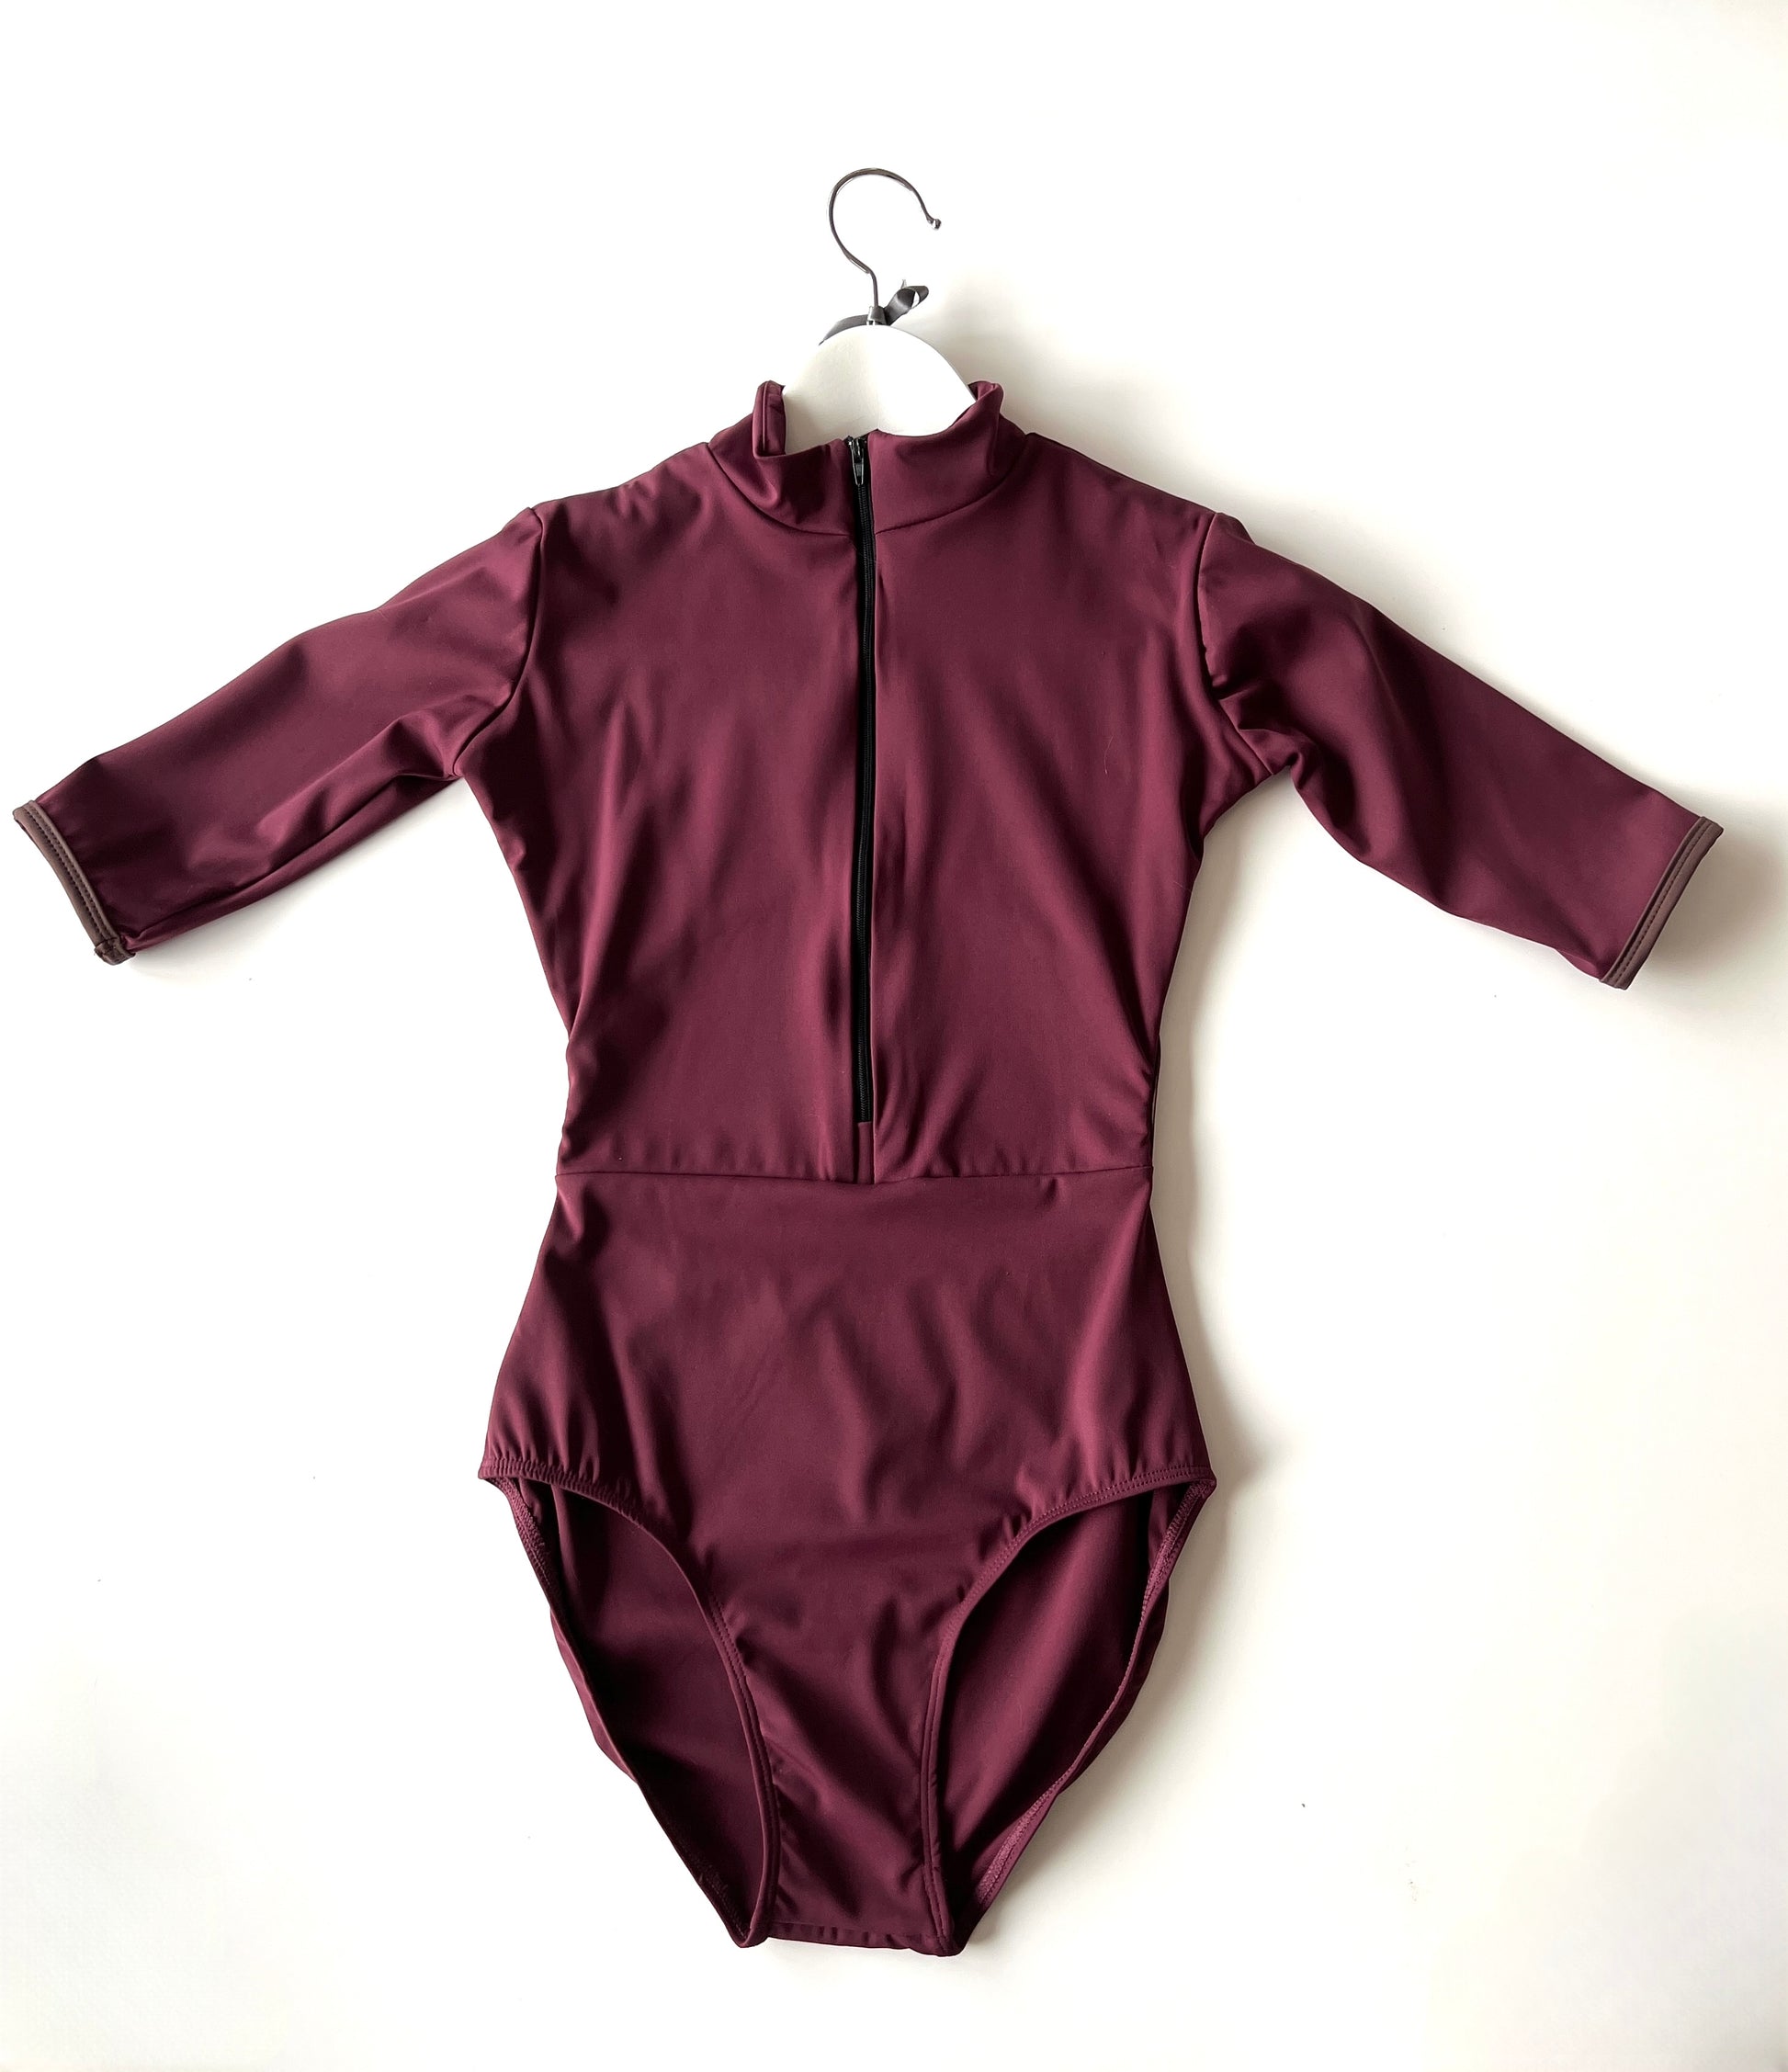 Zip up Leotard in burgundy with open back sold by The Collective Dancewear